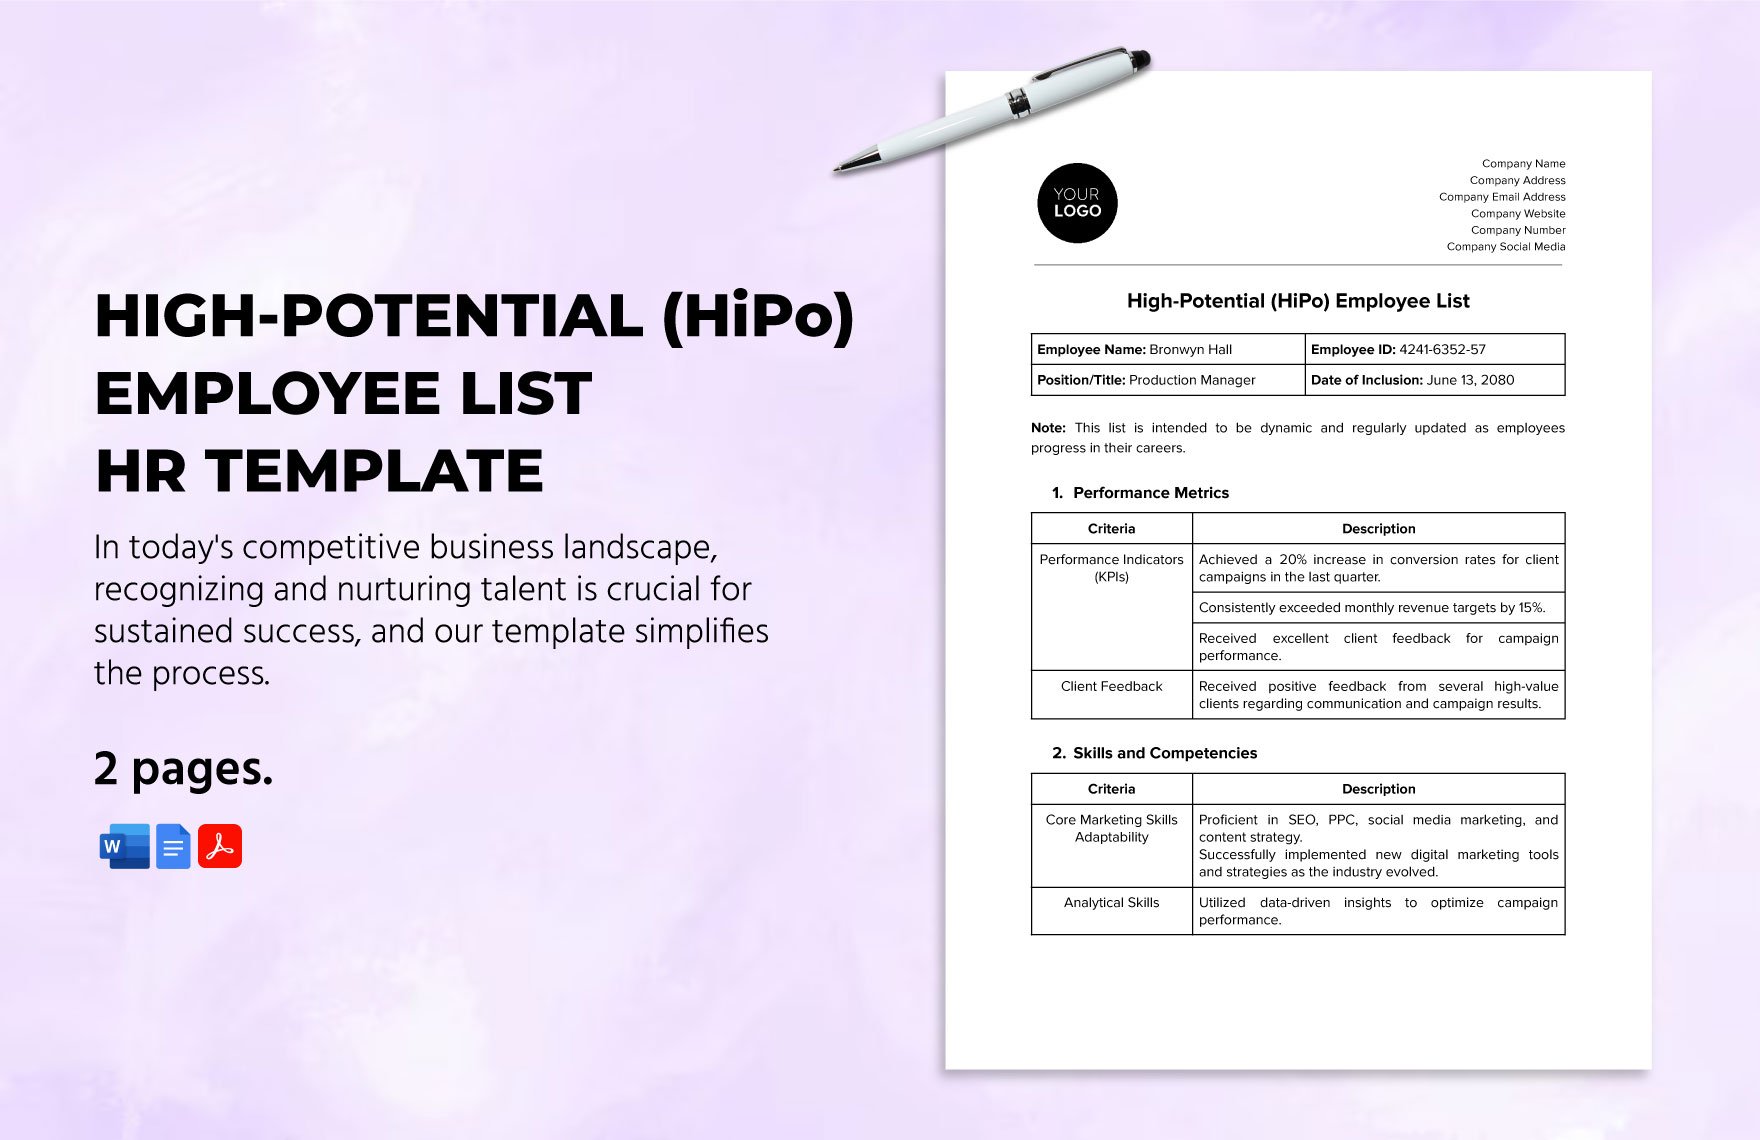 High-Potential (HiPo) Employee List HR Template